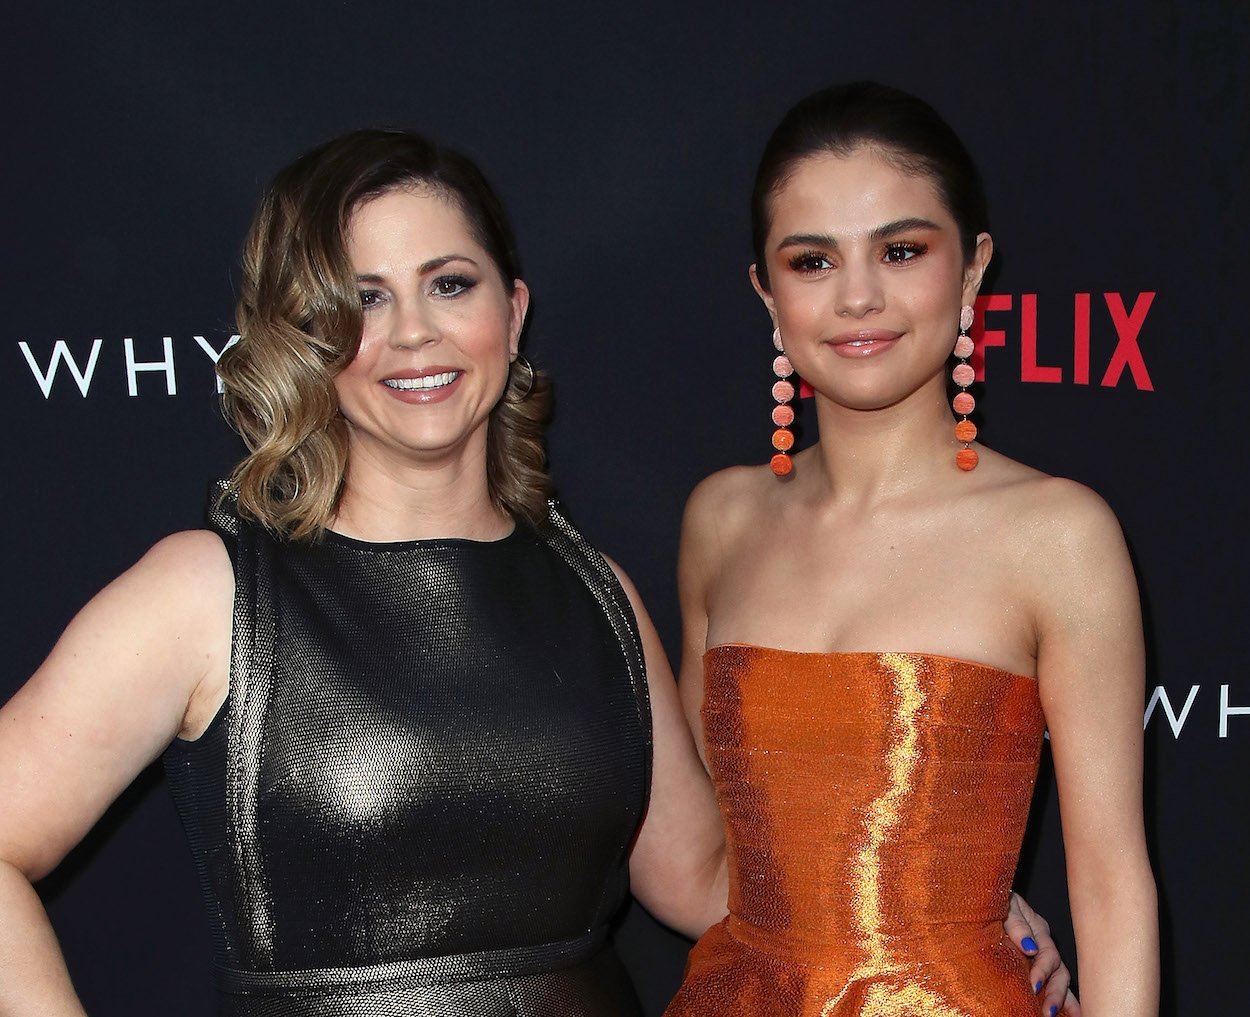 Selena Gomez and her mom Mandy Teefey attend the premiere of 13 Reasons Why